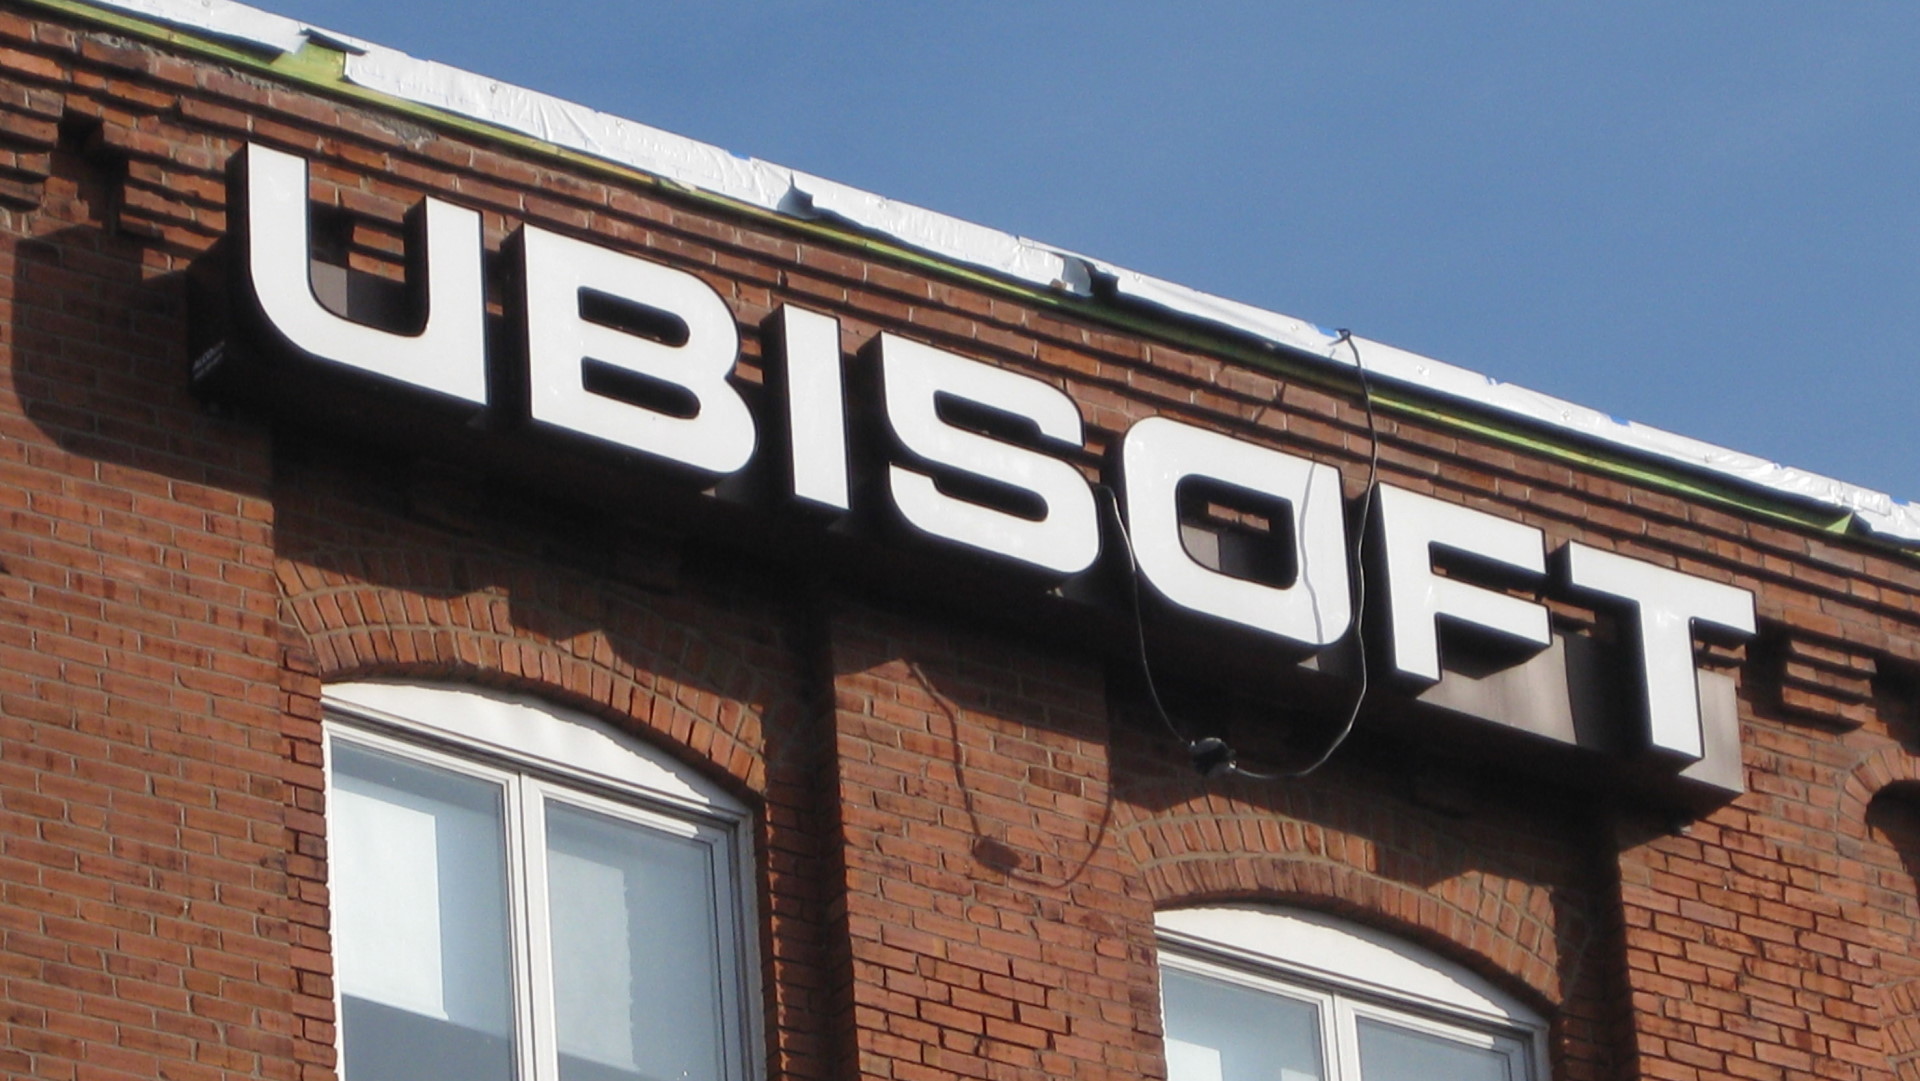  Ubisoft employees say they've 'had enough' of 'empty promises,' offer solidarity to Activision Blizzard 